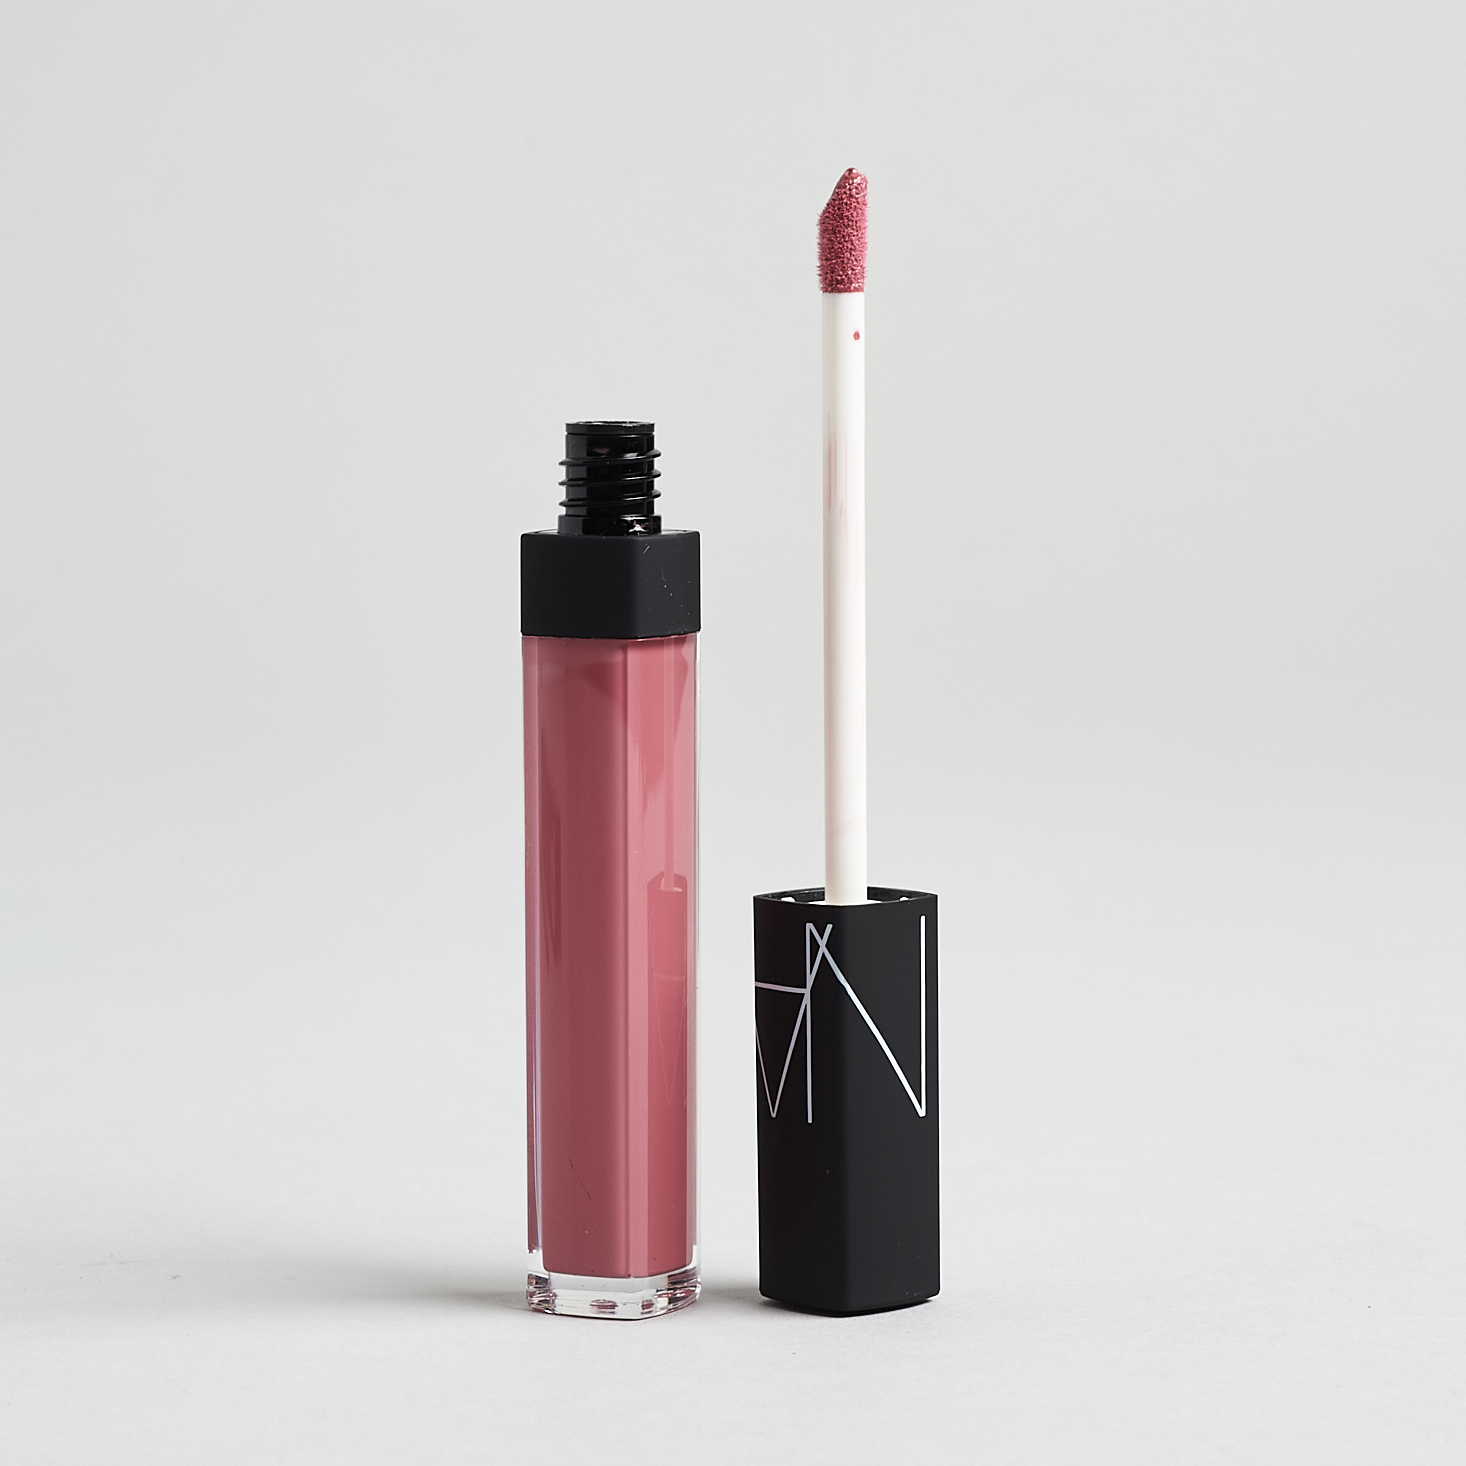 NARS Lip Gloss is Mythic Red - open